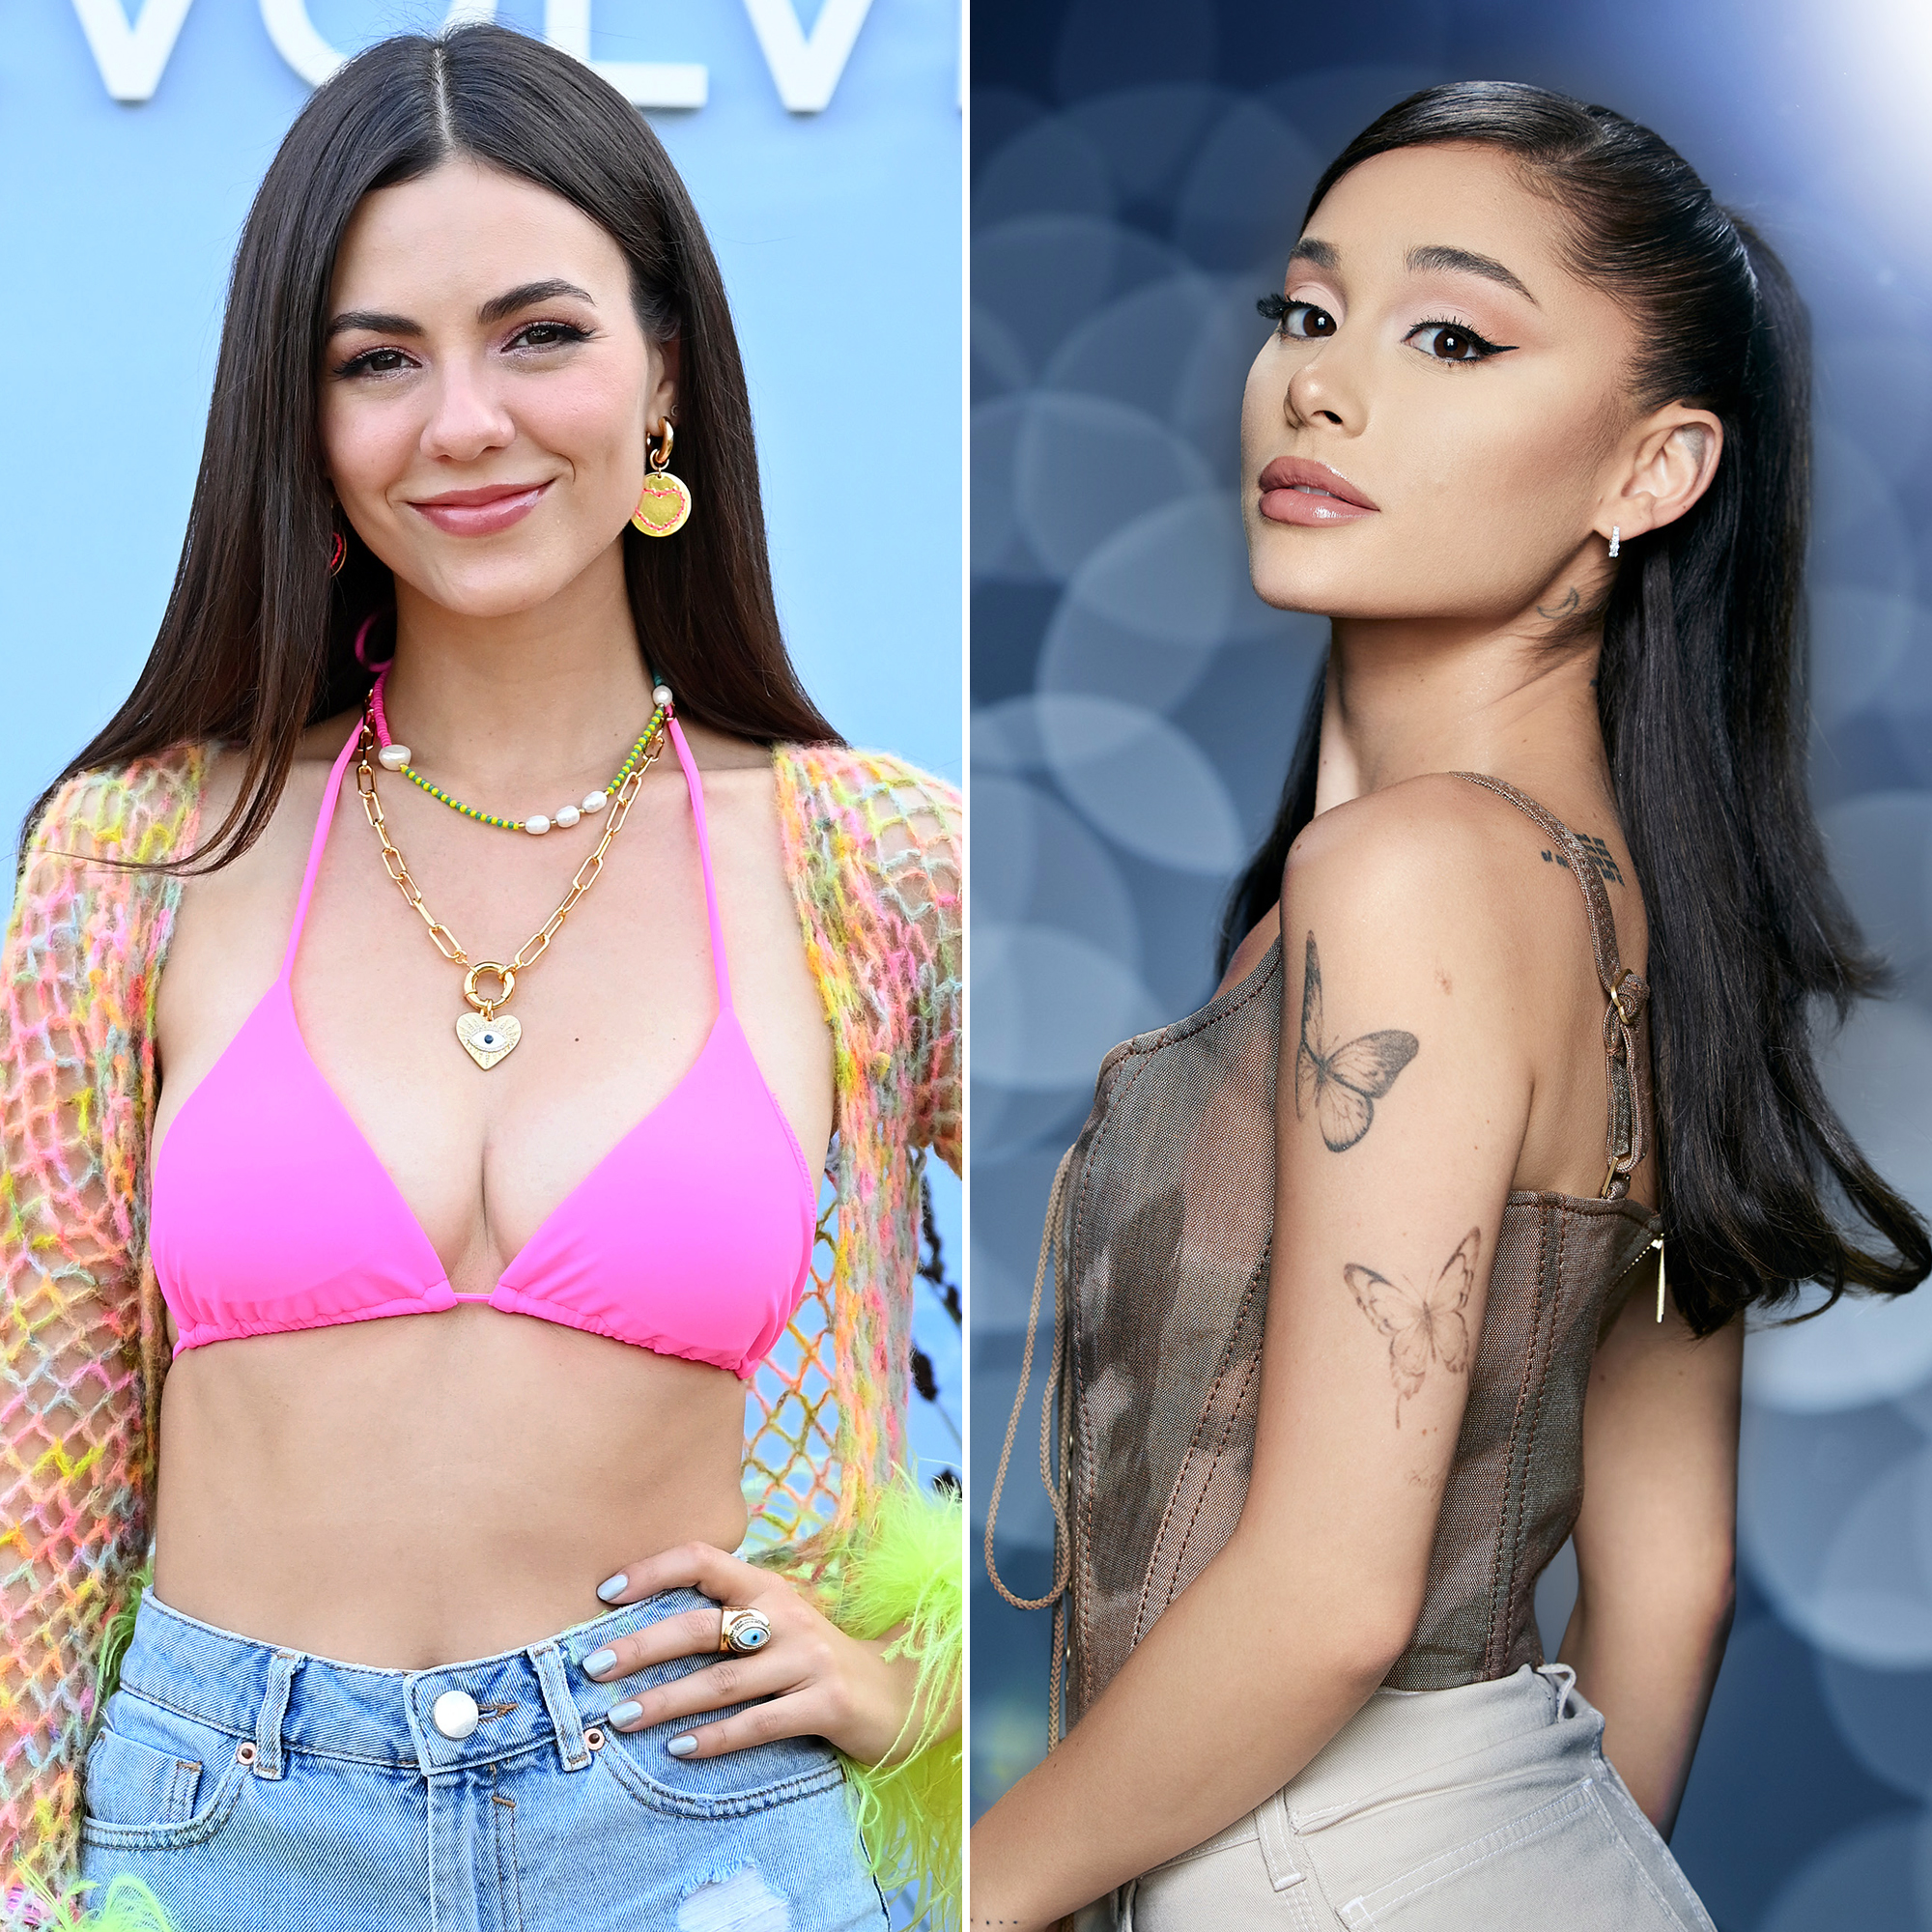 brenda mohr recommends victoria justice and ariana grande beef pic